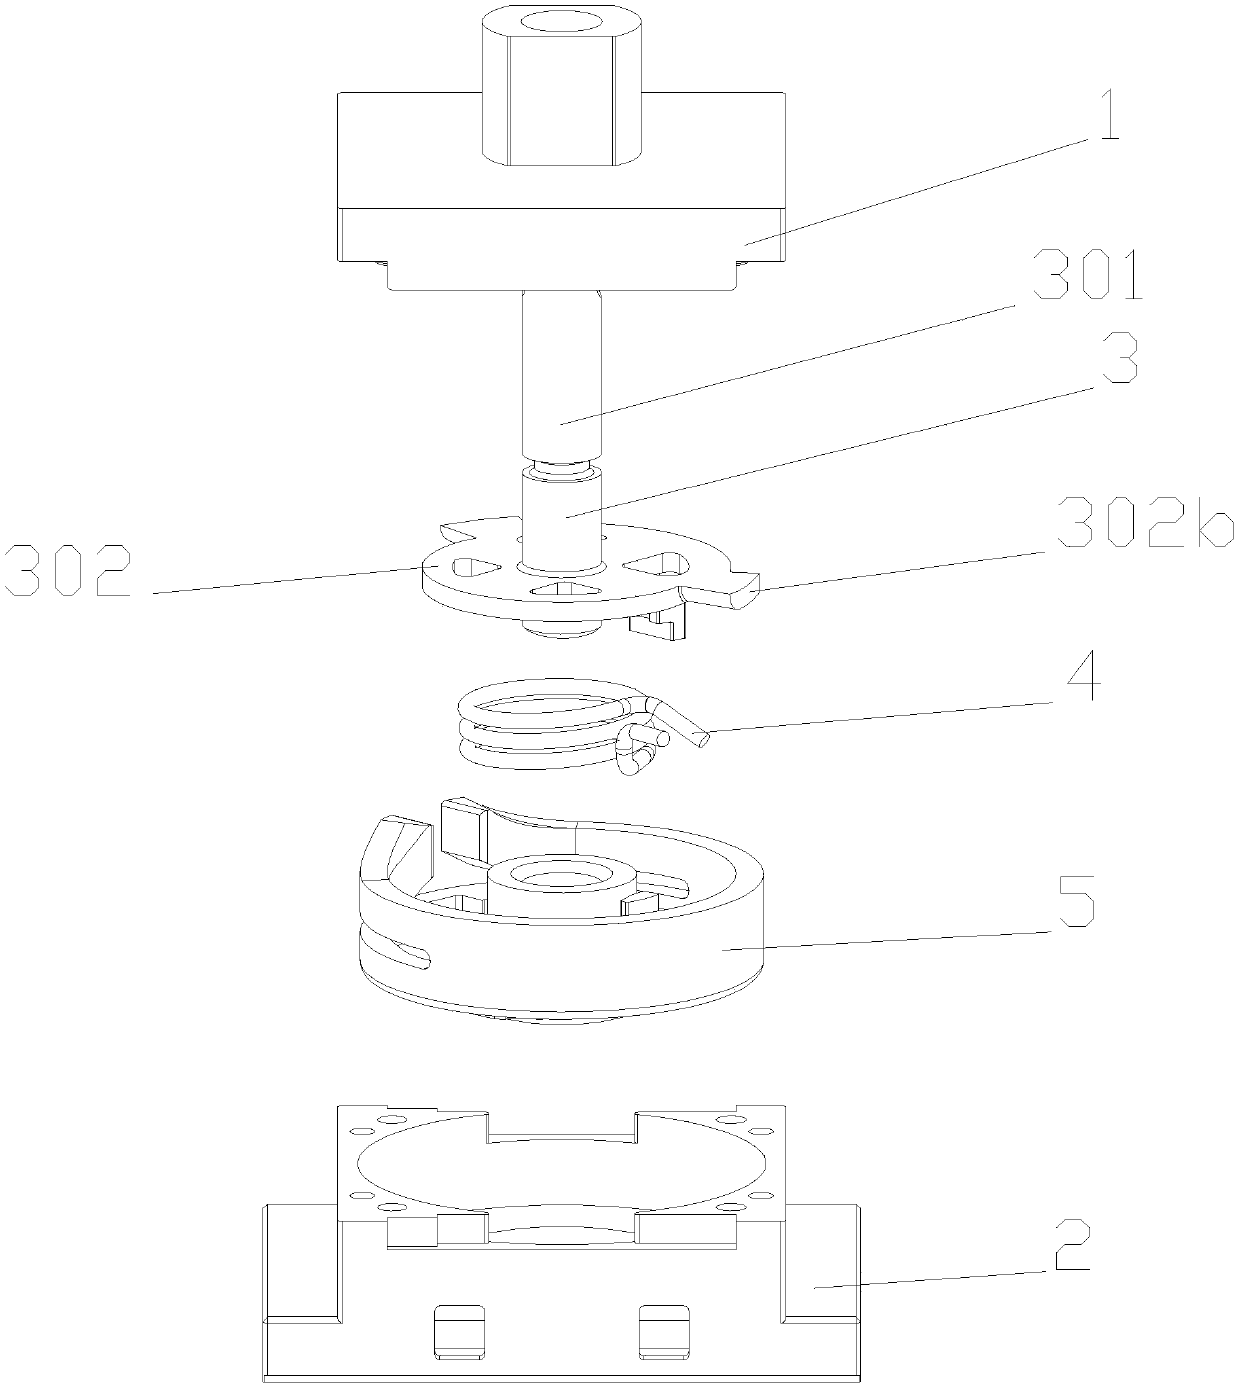 Rotary switch operating mechanism